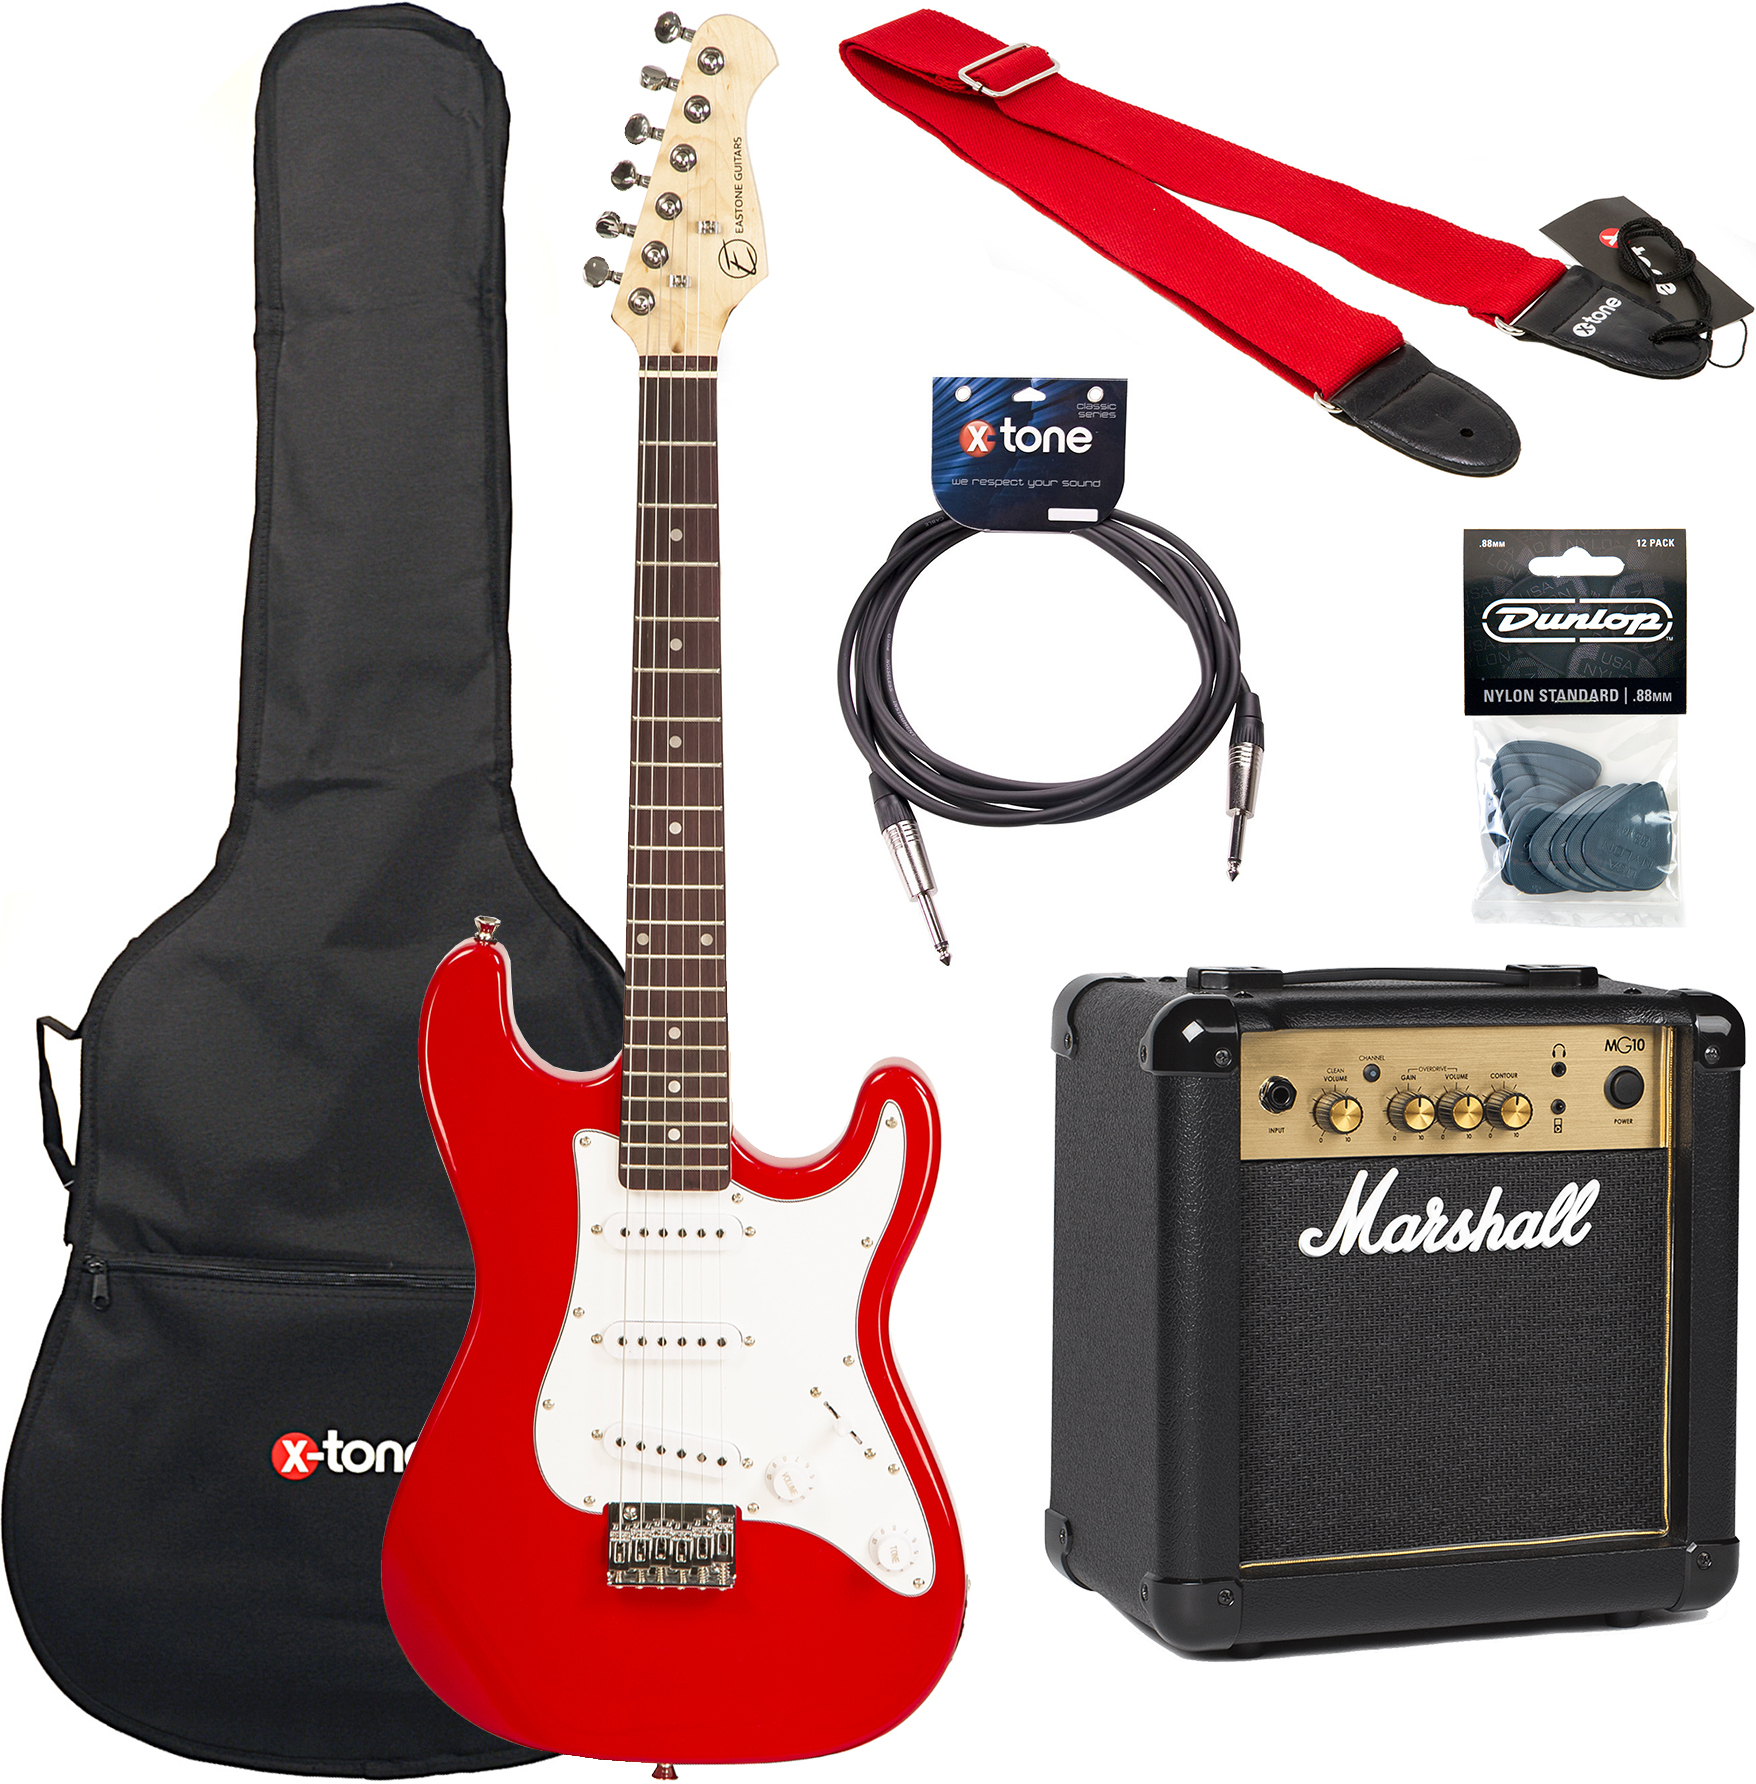 Eastone Str Mini +marshall Mg10g +cable +housse+ Courroie+ Mediators + Mg10g Gold Combo 10 W - Red - Electric guitar set - Main picture